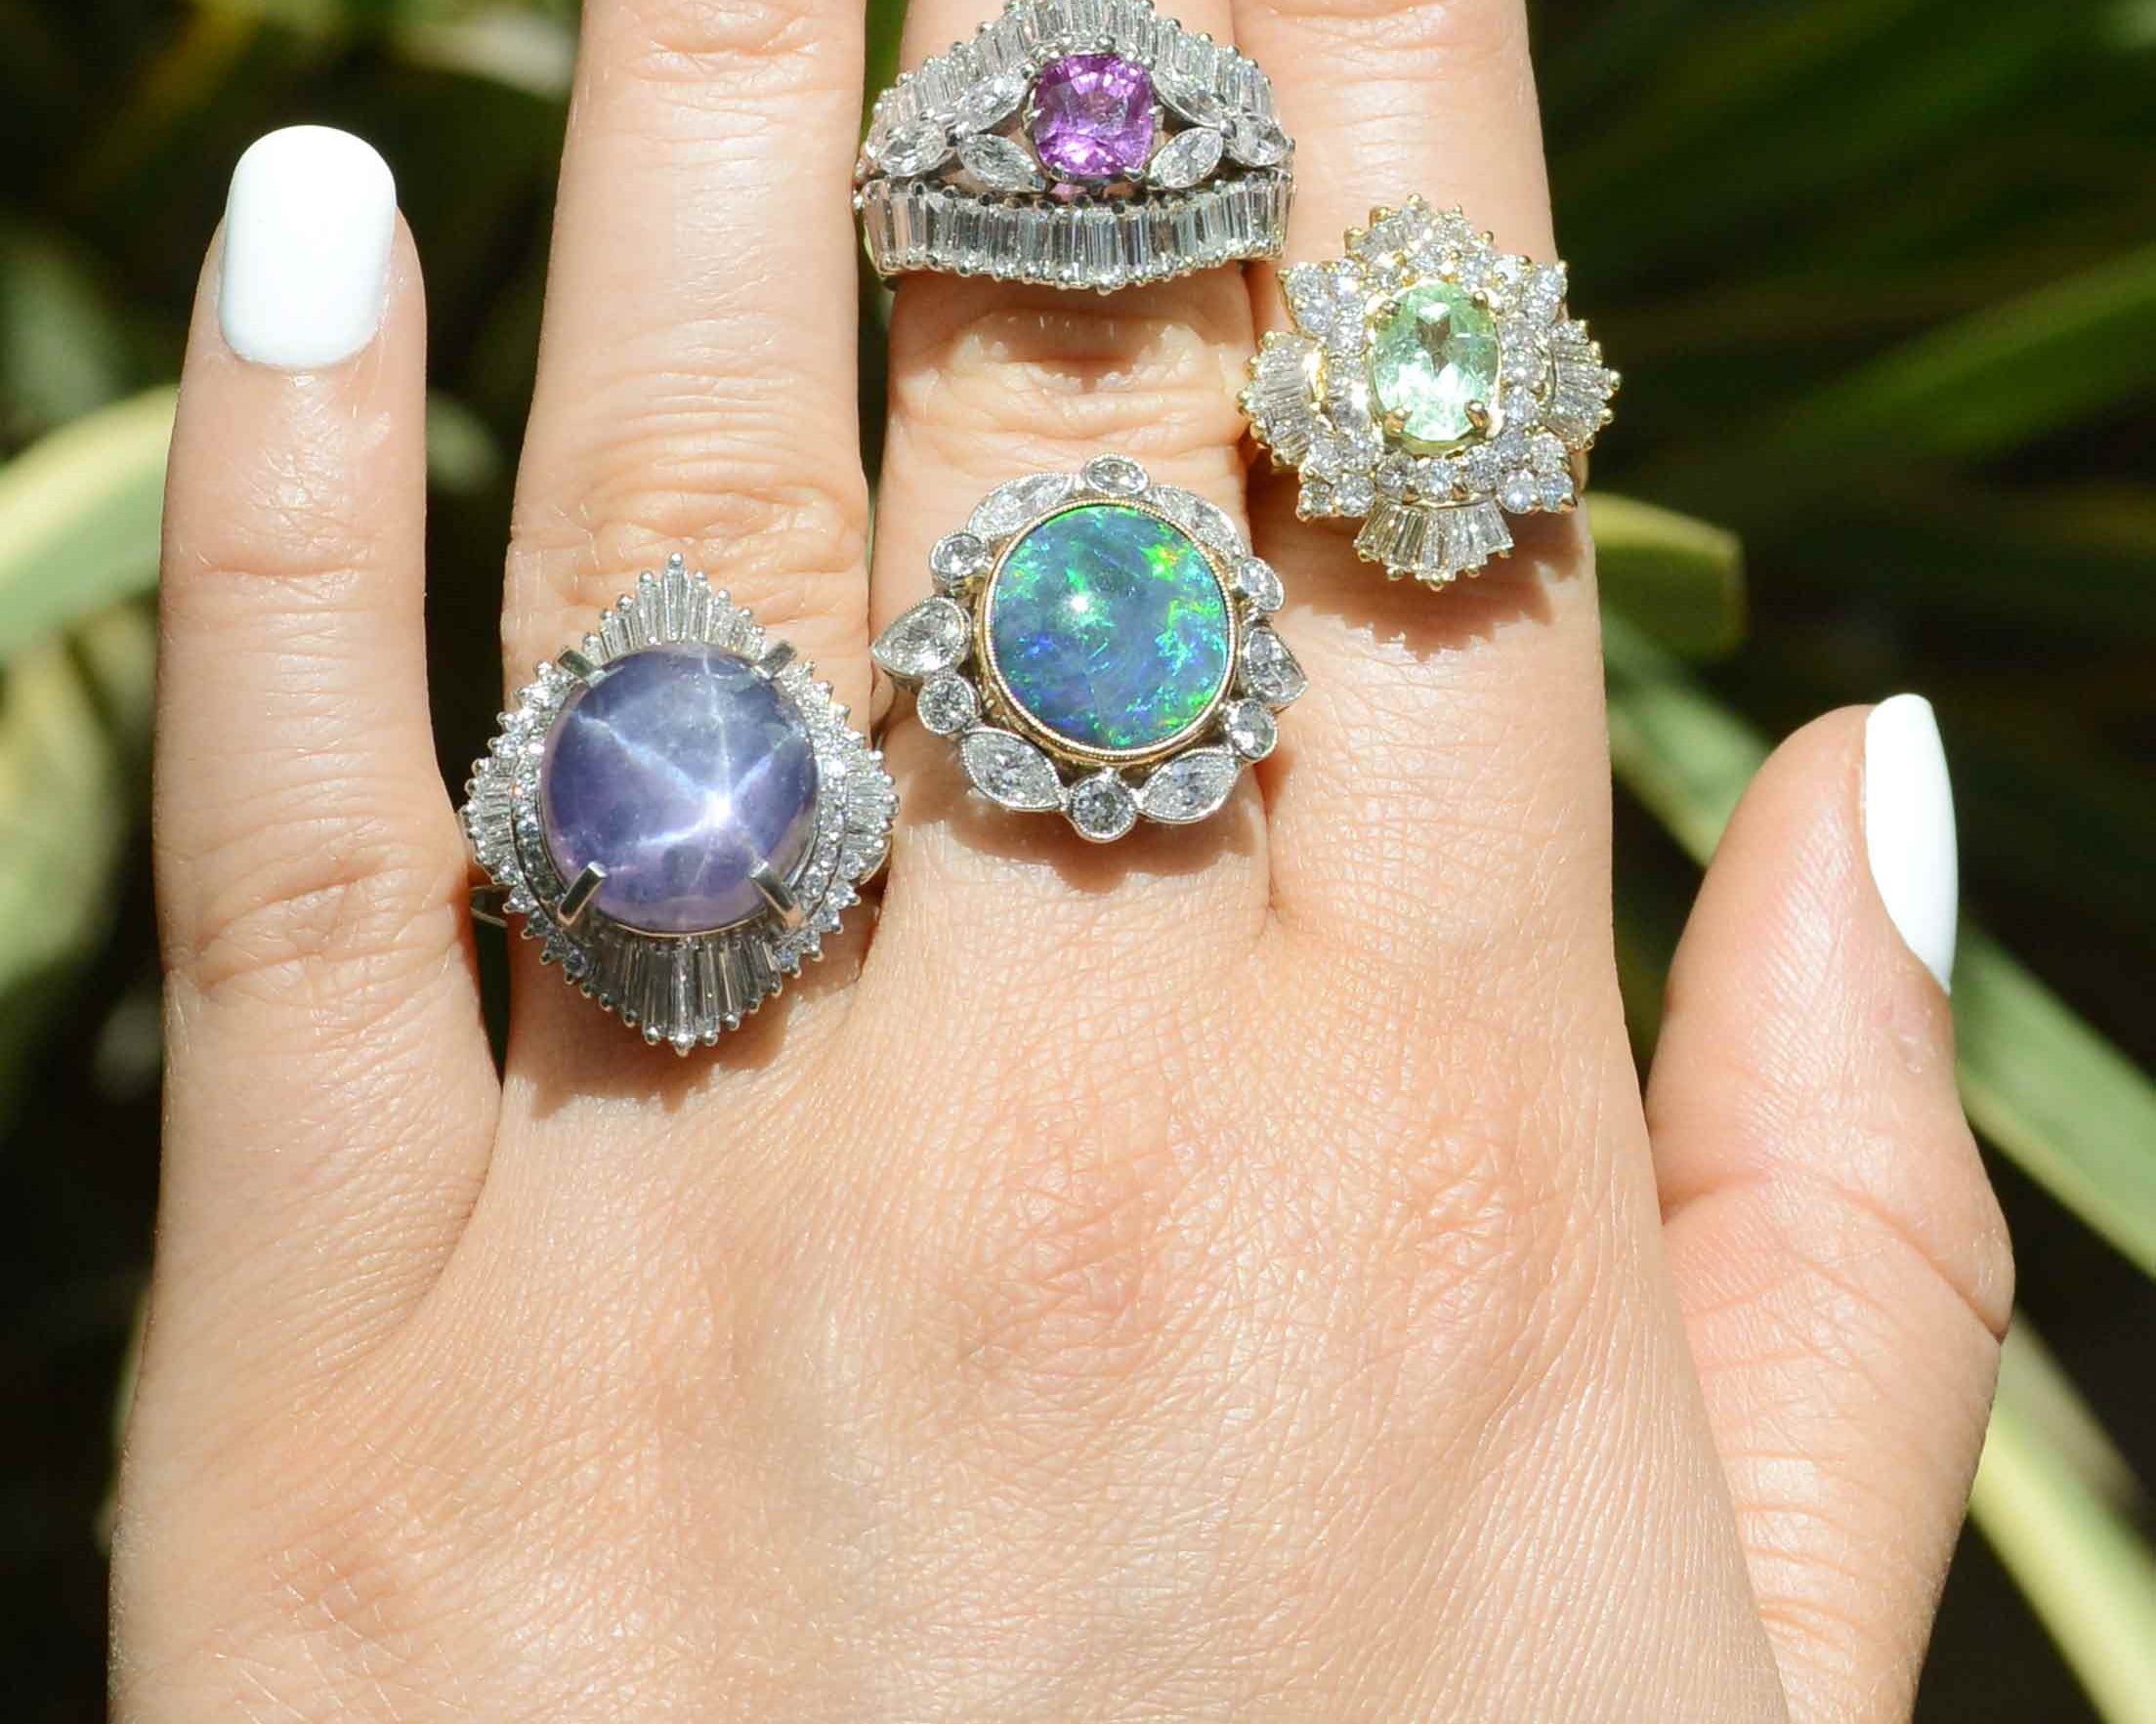 Some large gemstone and diamond cocktail rings available from our estate jewelry store.